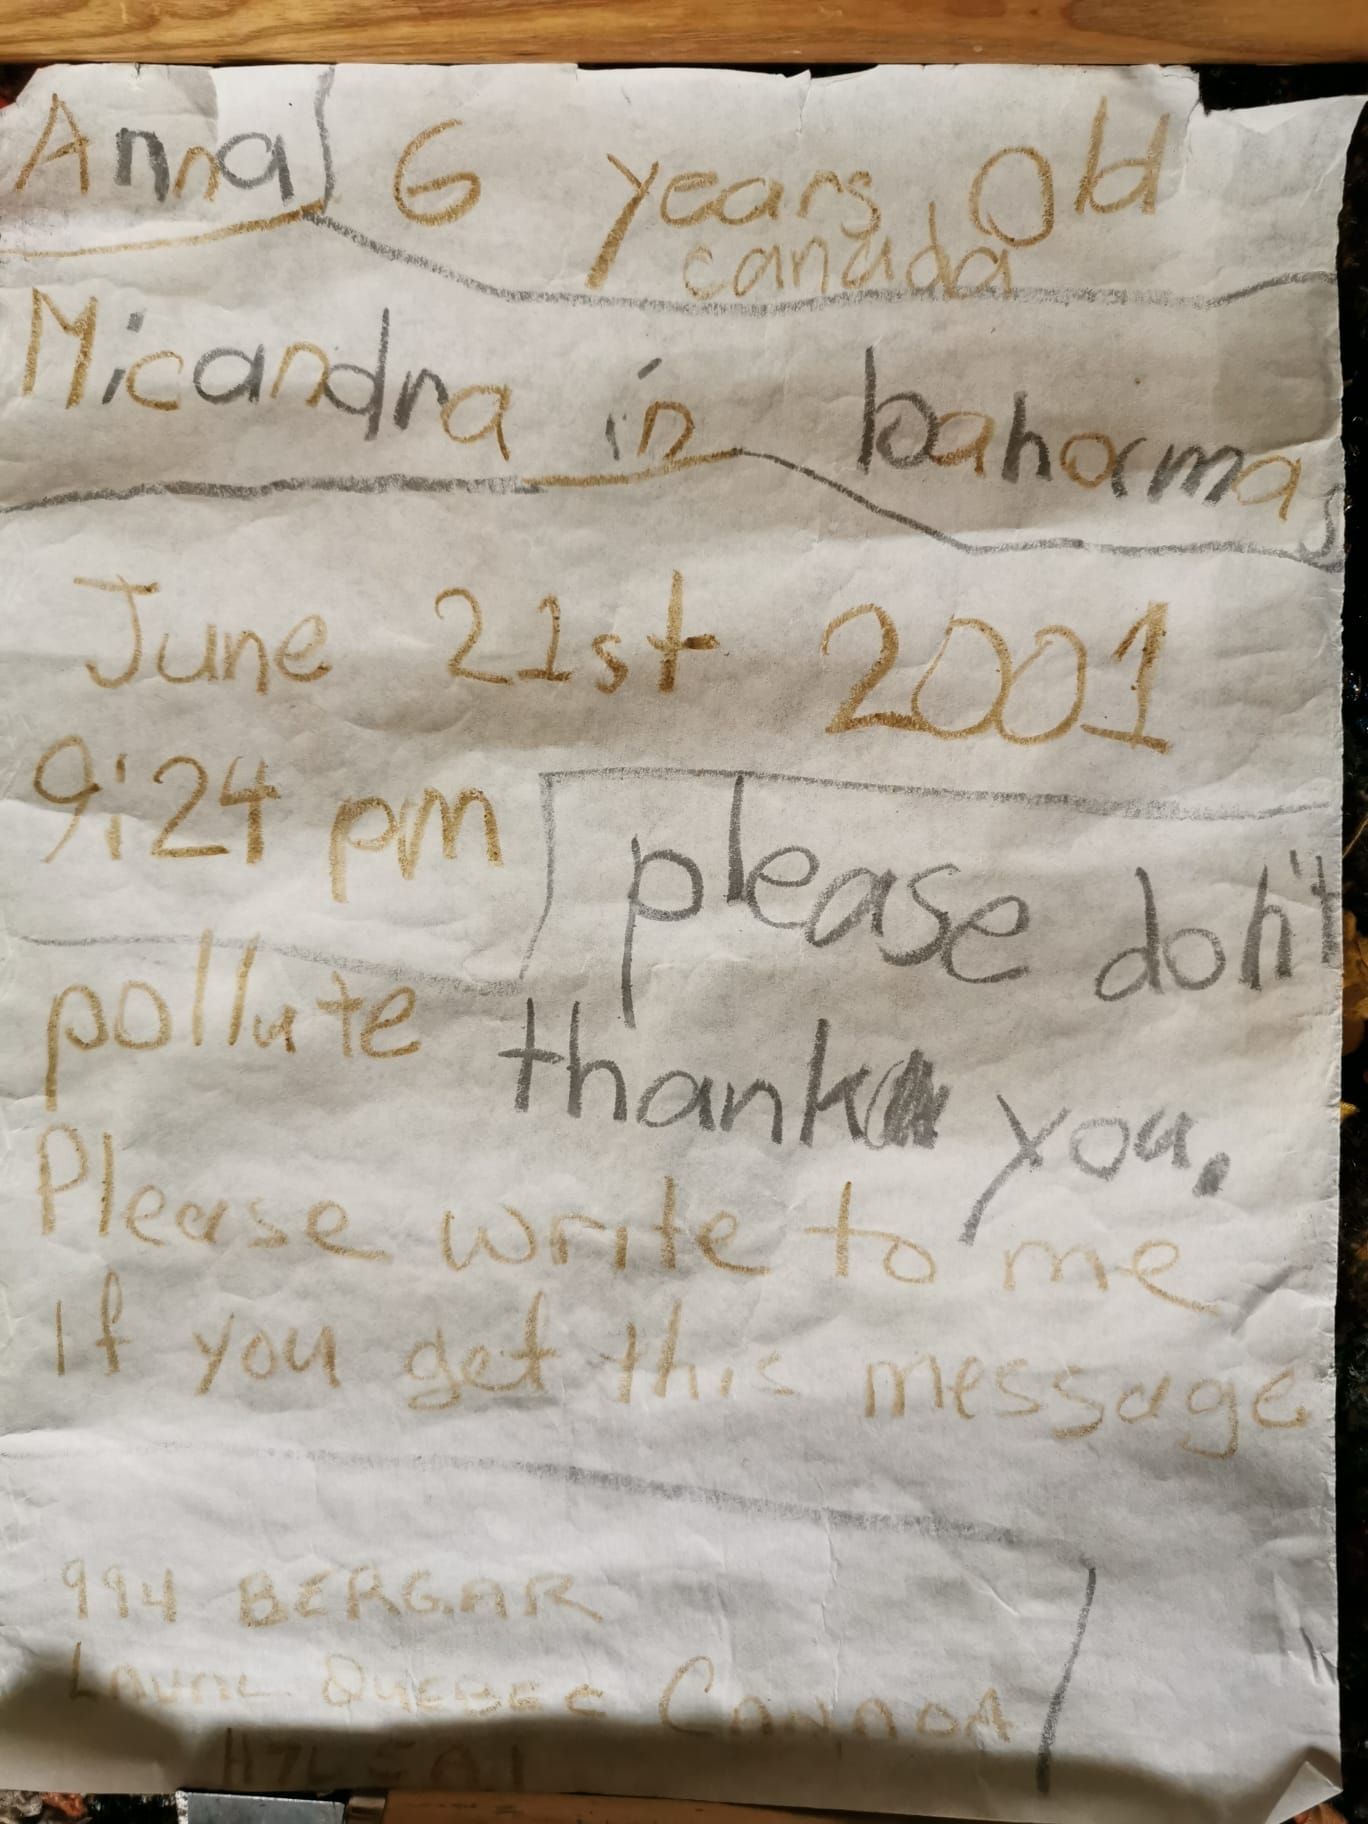 The letter written in 2001 by Anna, aged six from Canada, while in the Bahamas